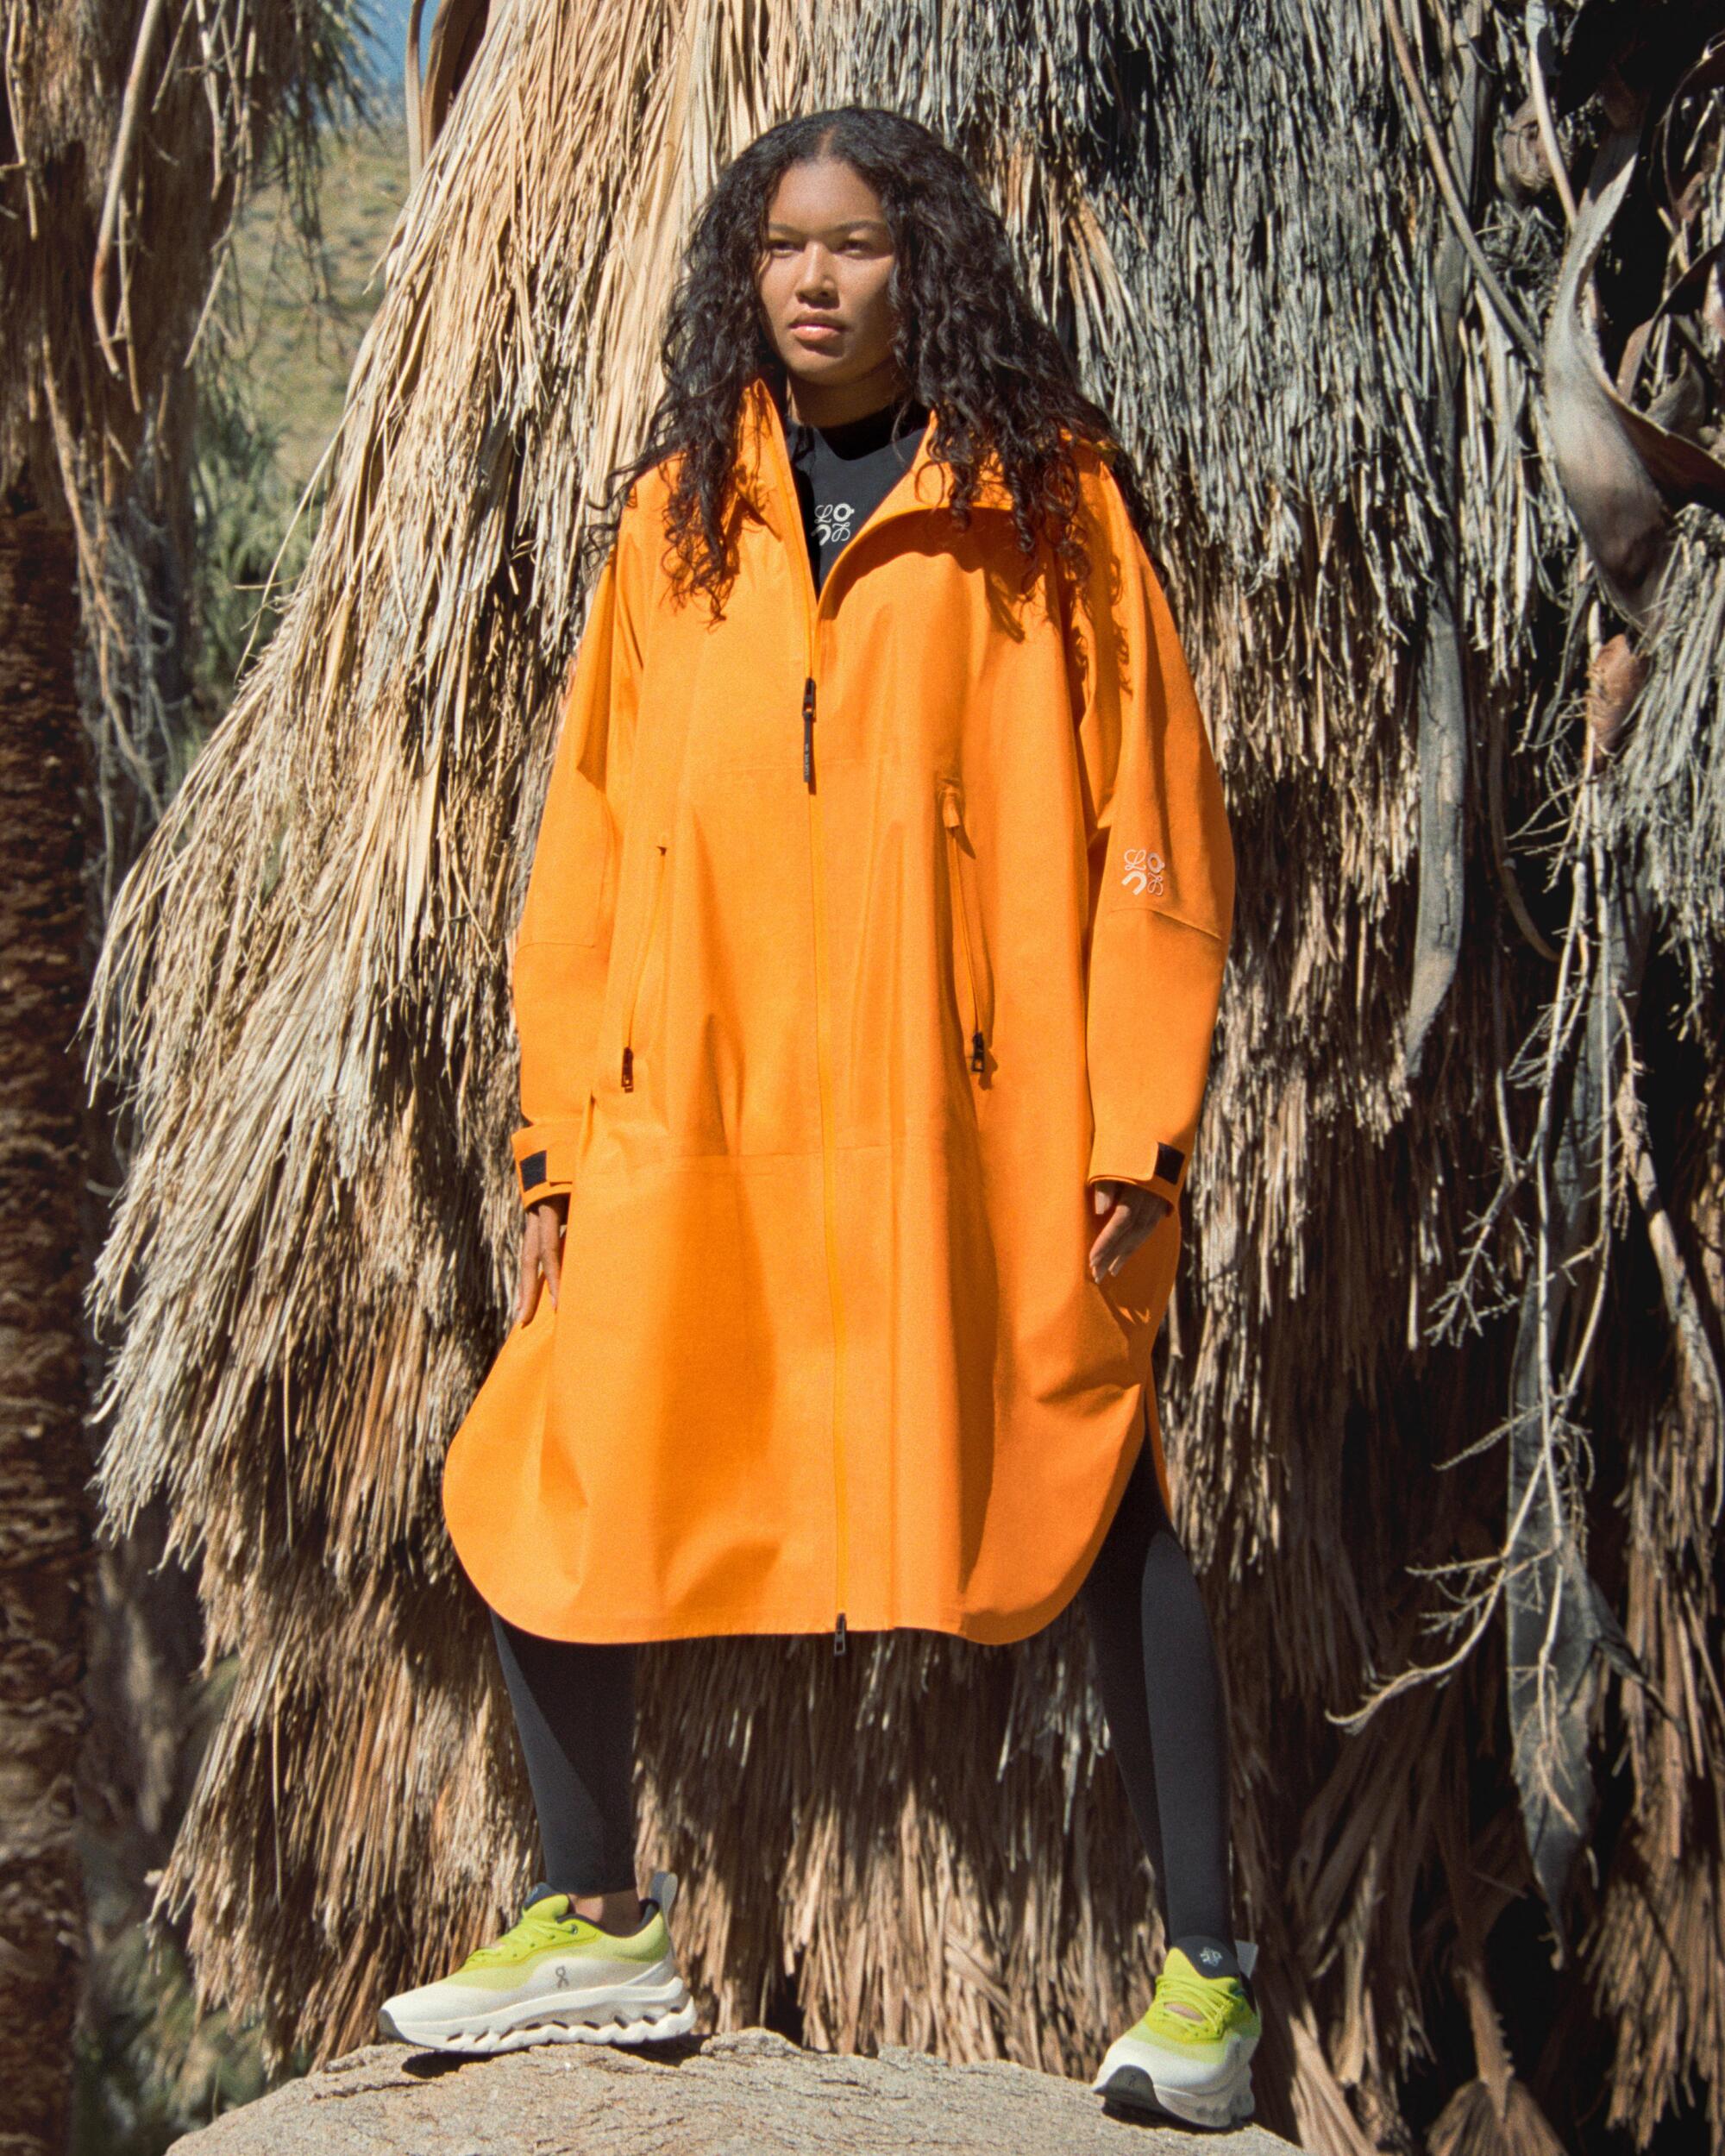 A person stands outdoors wearing a large orange coat